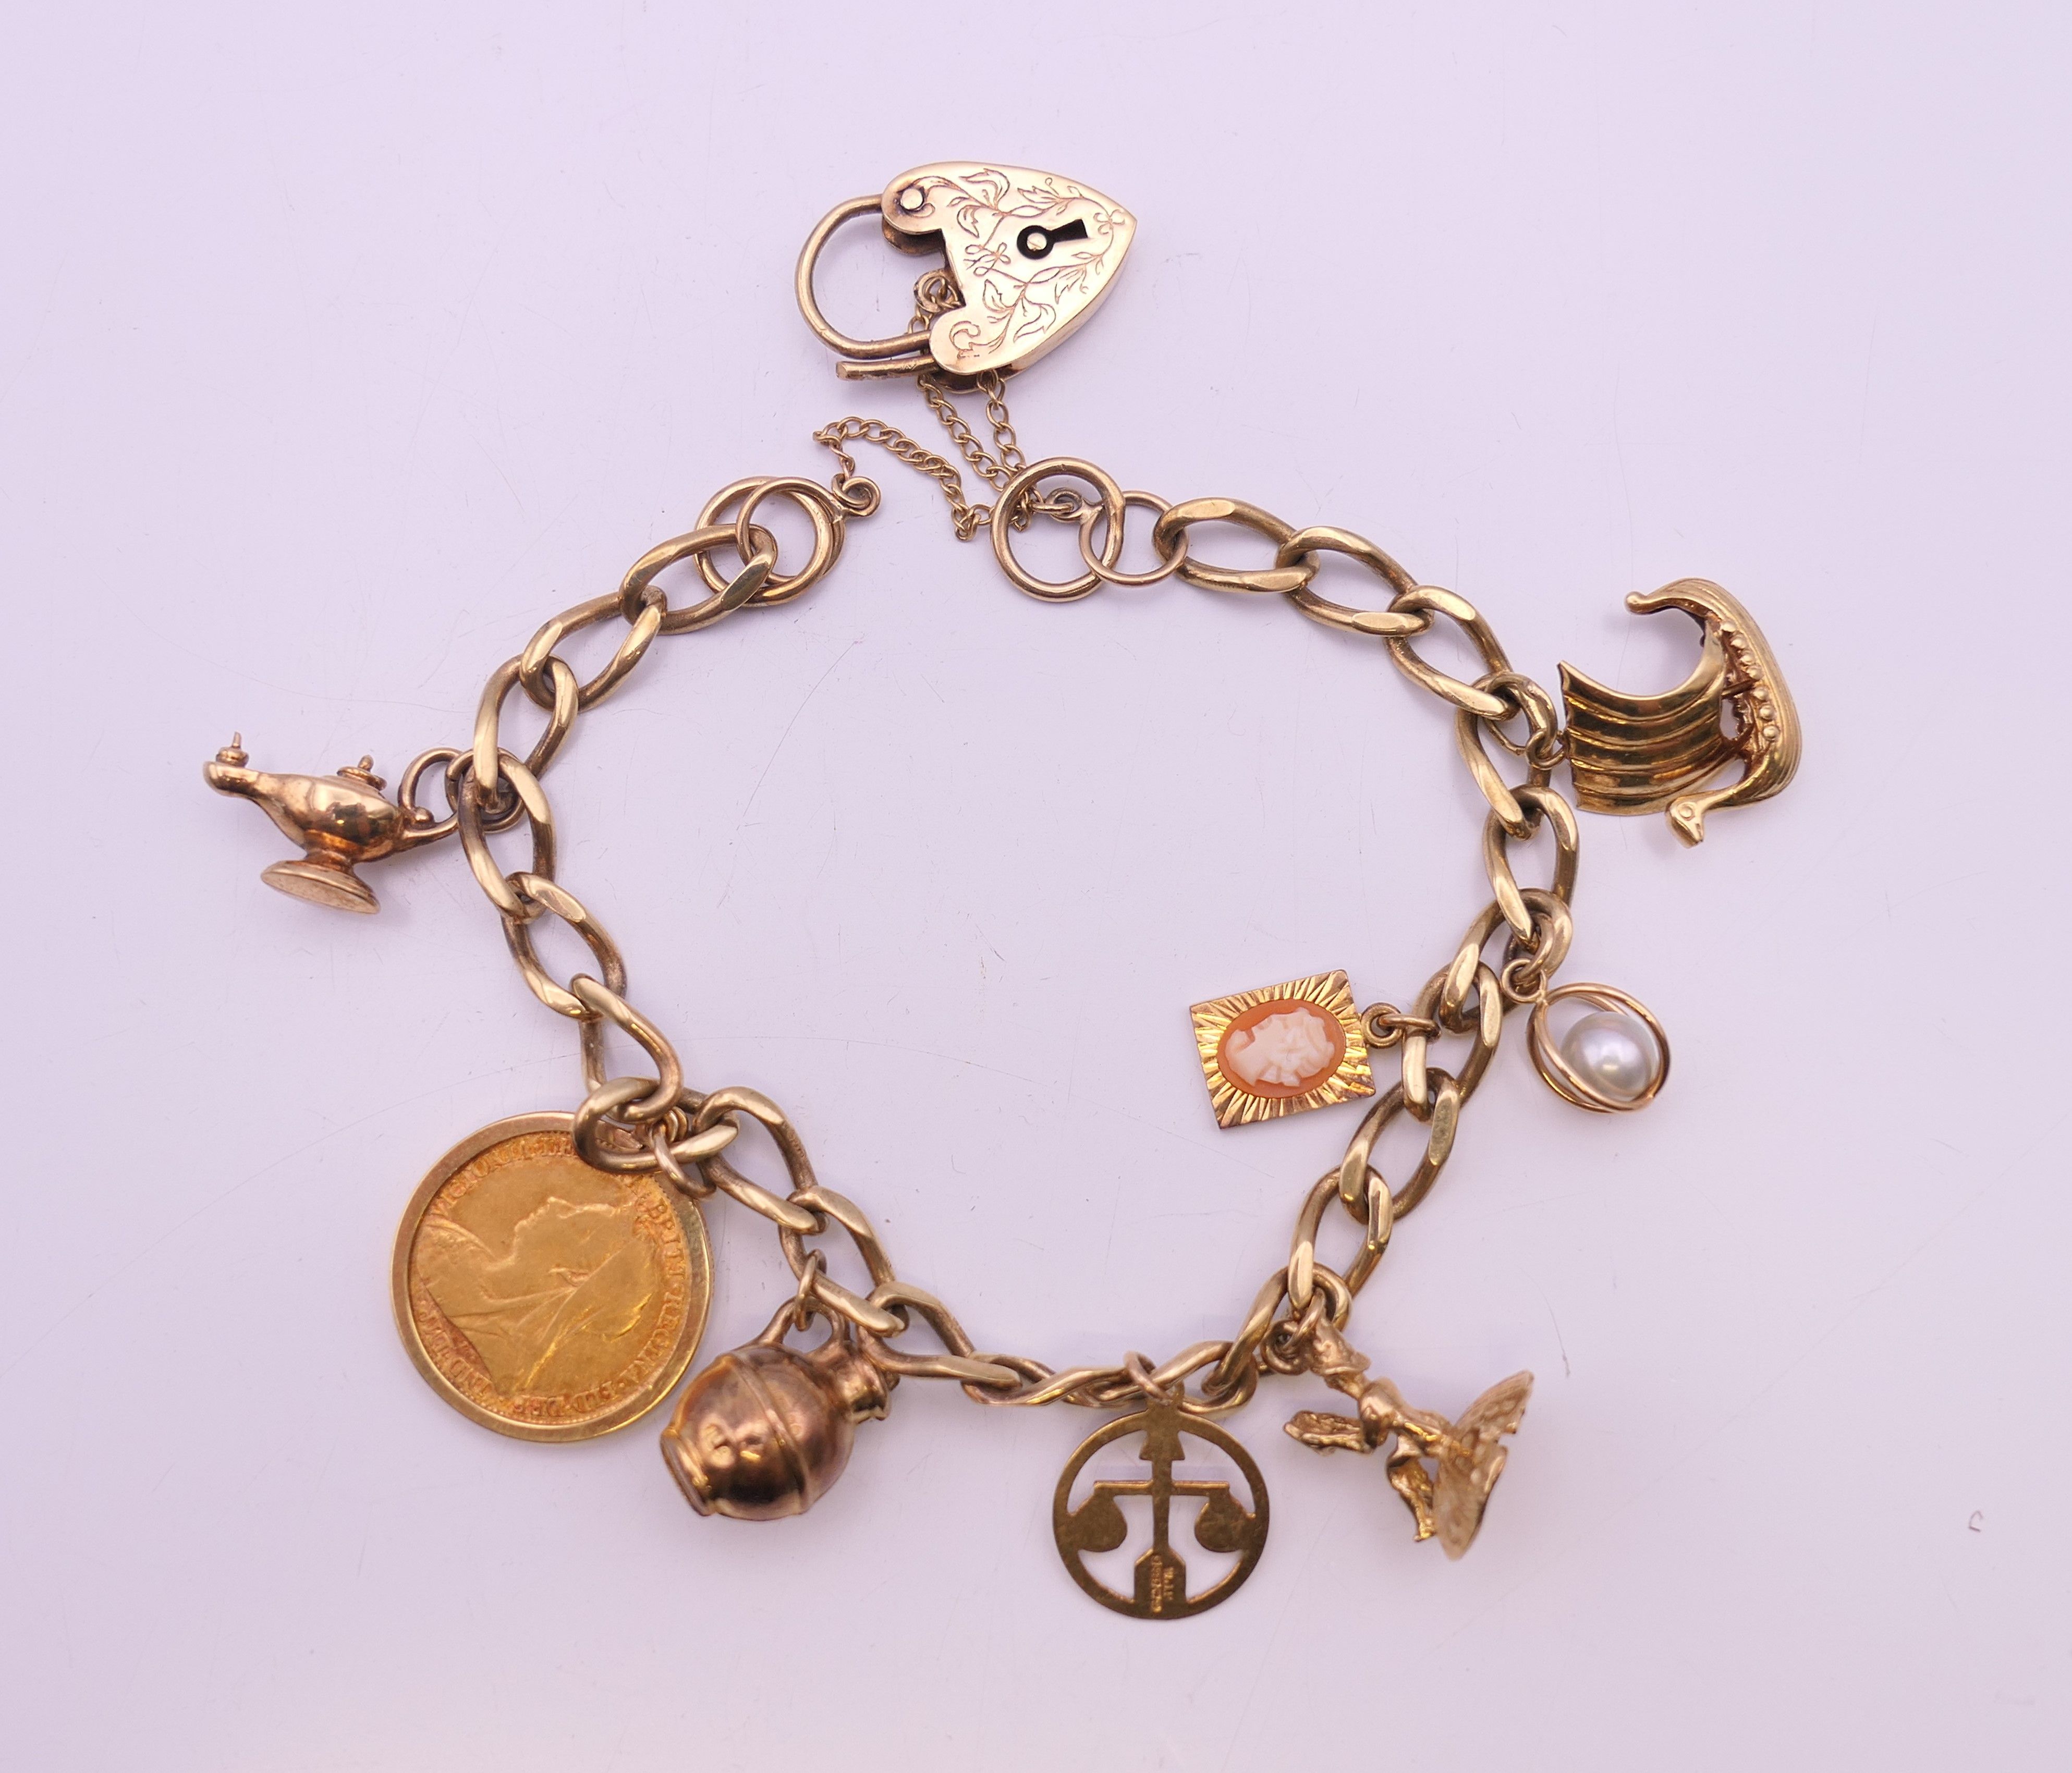 A 9 ct gold charm bracelet, set with various charms and an 1894 half sovereign. 25.